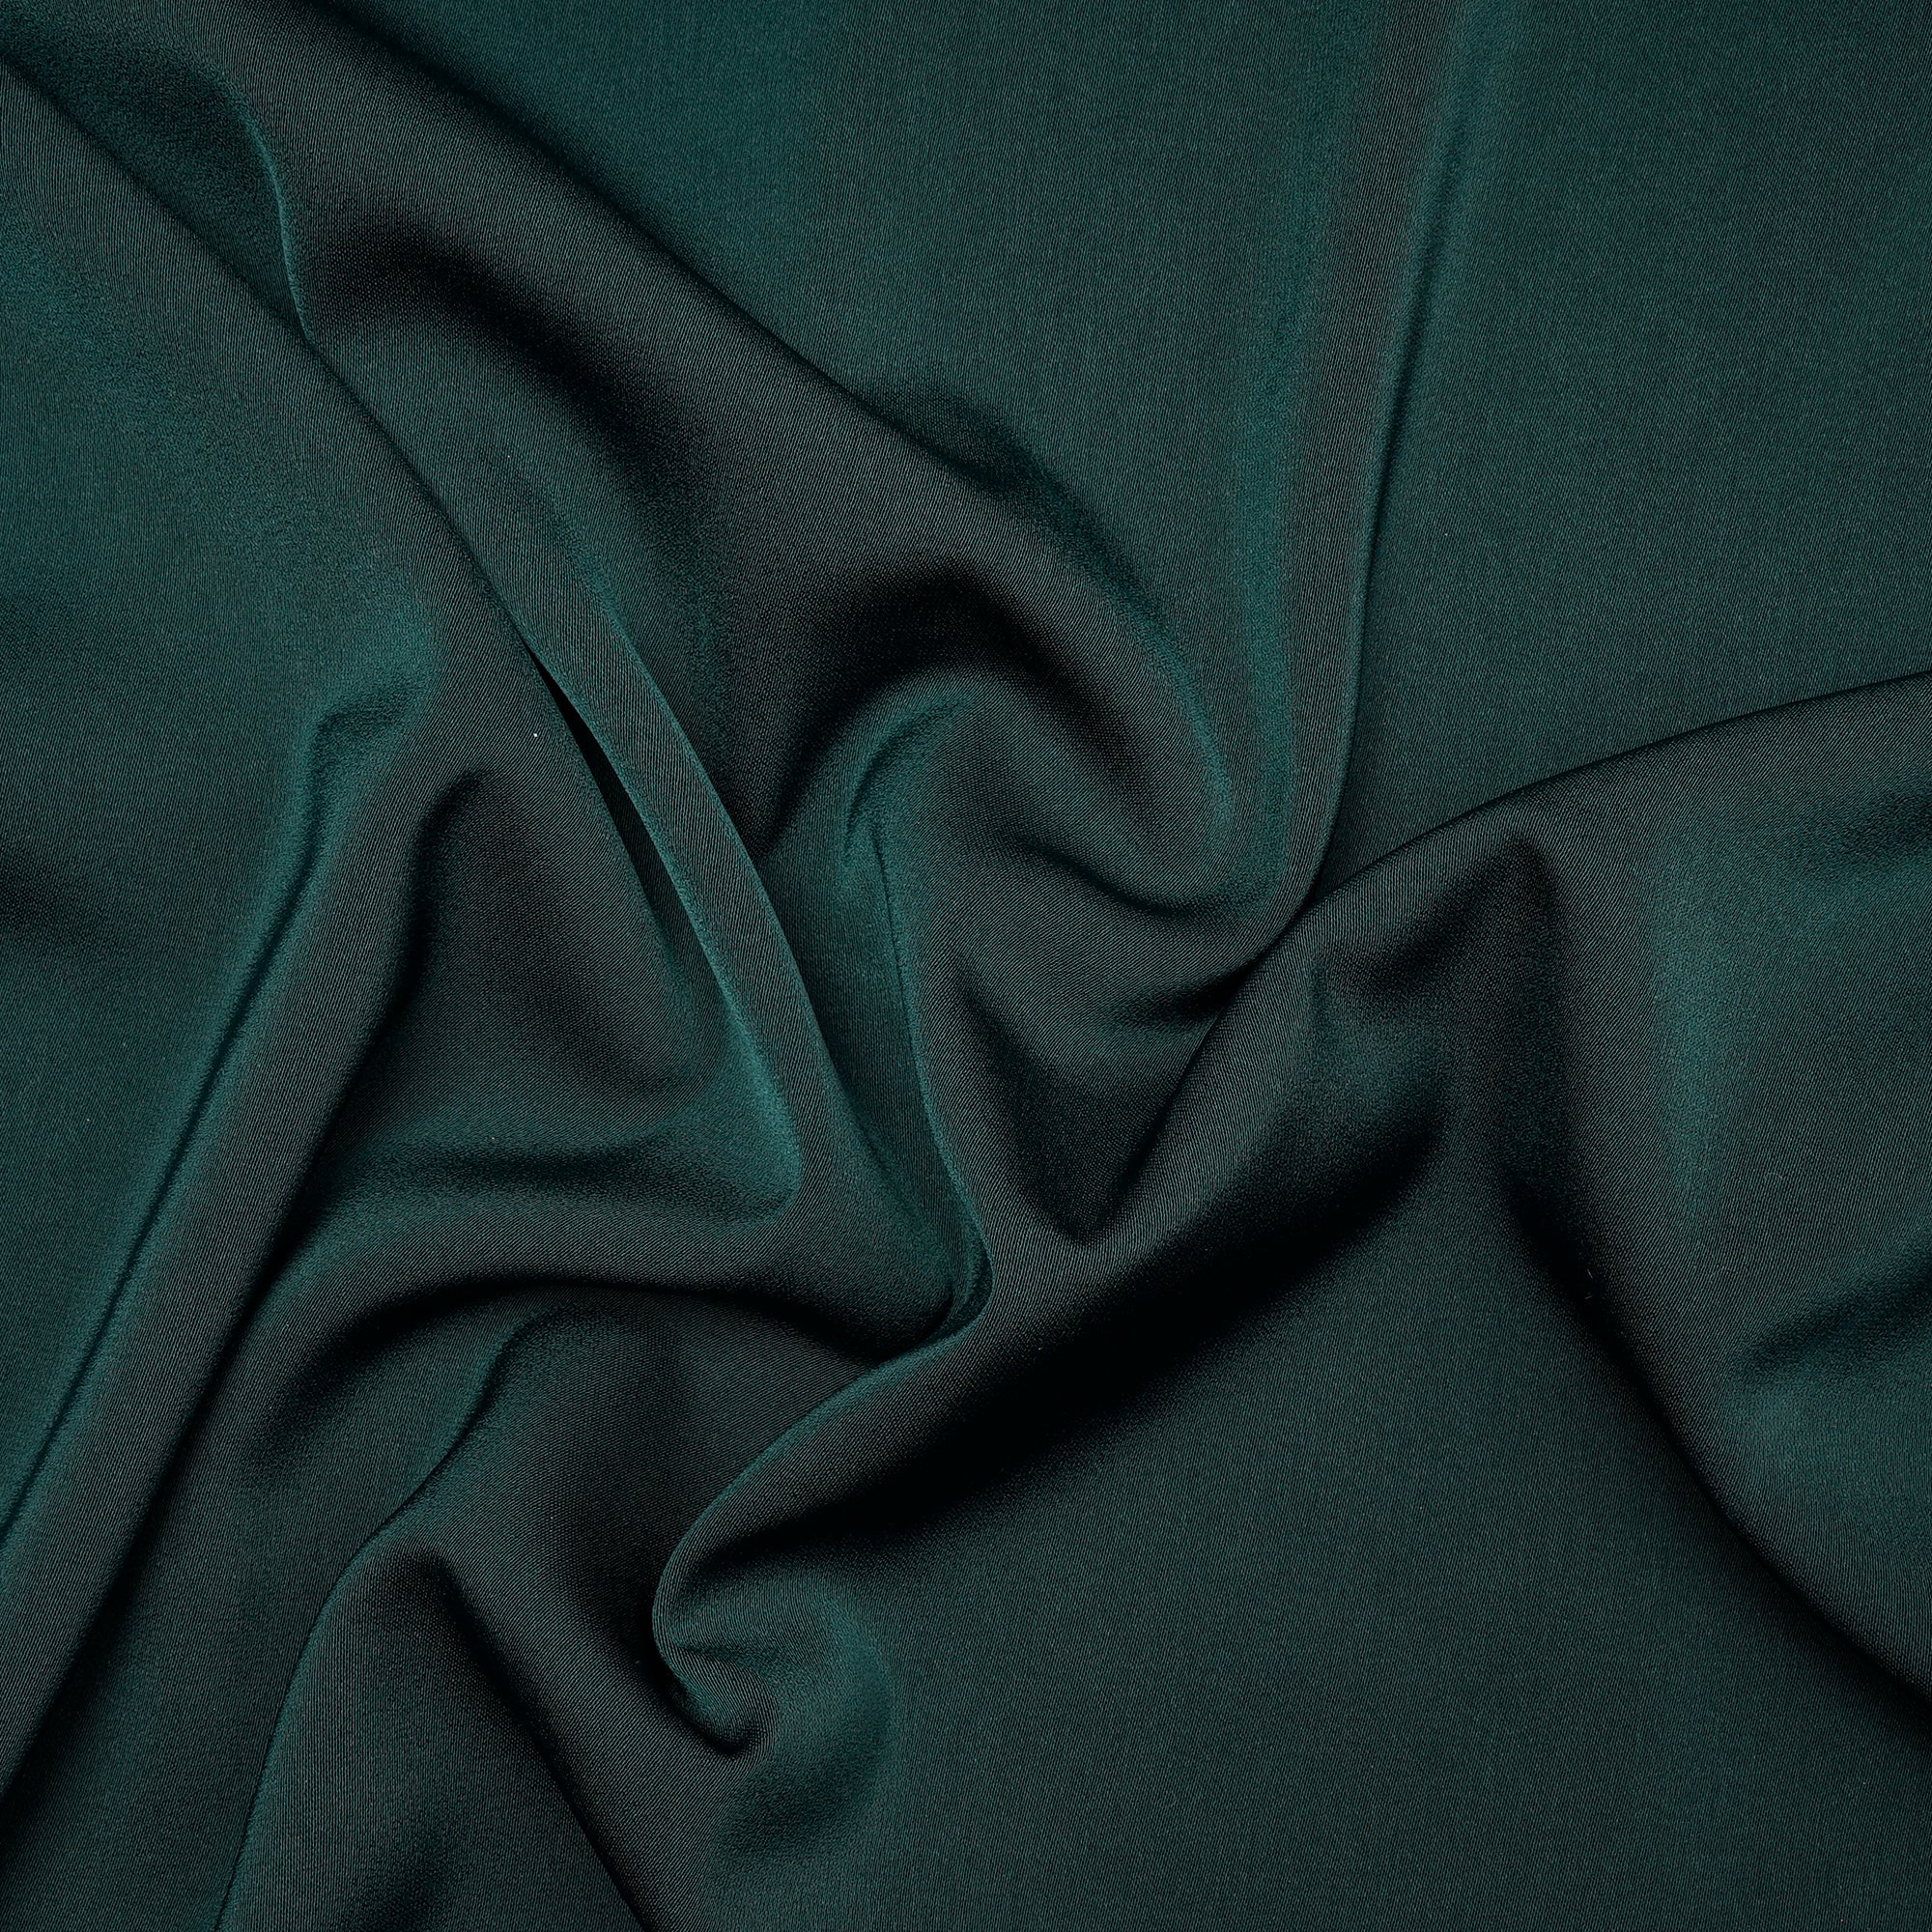 Bottle Green Dyed Crepe Fabric